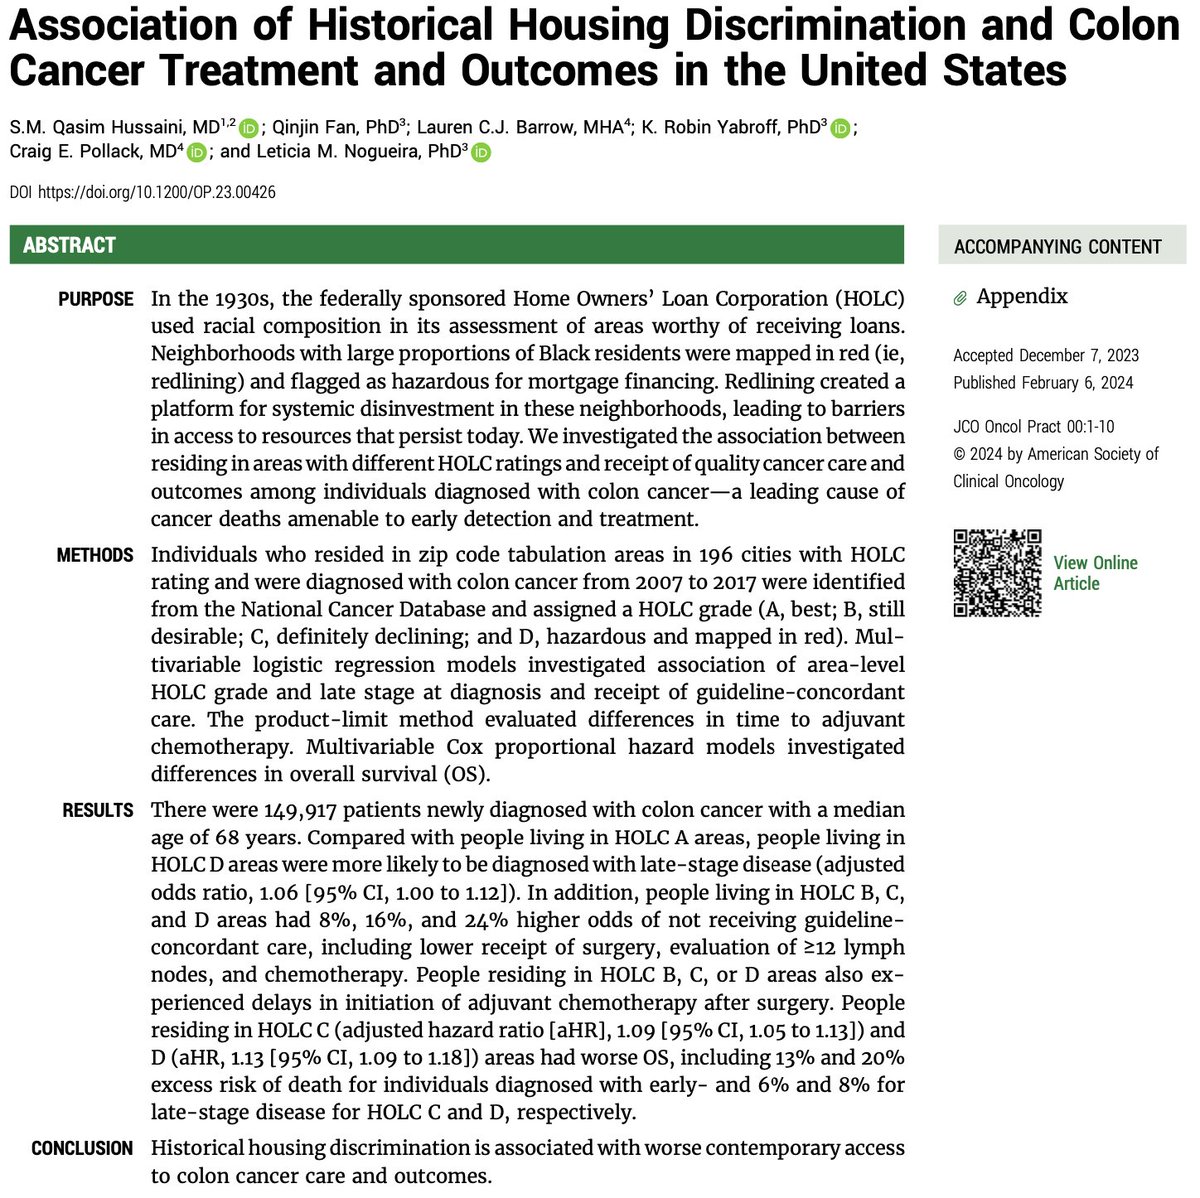 Out now in @JCOOP_ASCO, our findings reveal the remarkable enduring impact of government-sanctioned historical housing discrimination (redlining) in the 1930s on modern-day colon cancer outcomes ascopubs.org/doi/10.1200/OP… CC @Qinjin_0504 @DrRobinYabroff @cepollack @DrNogueiraL